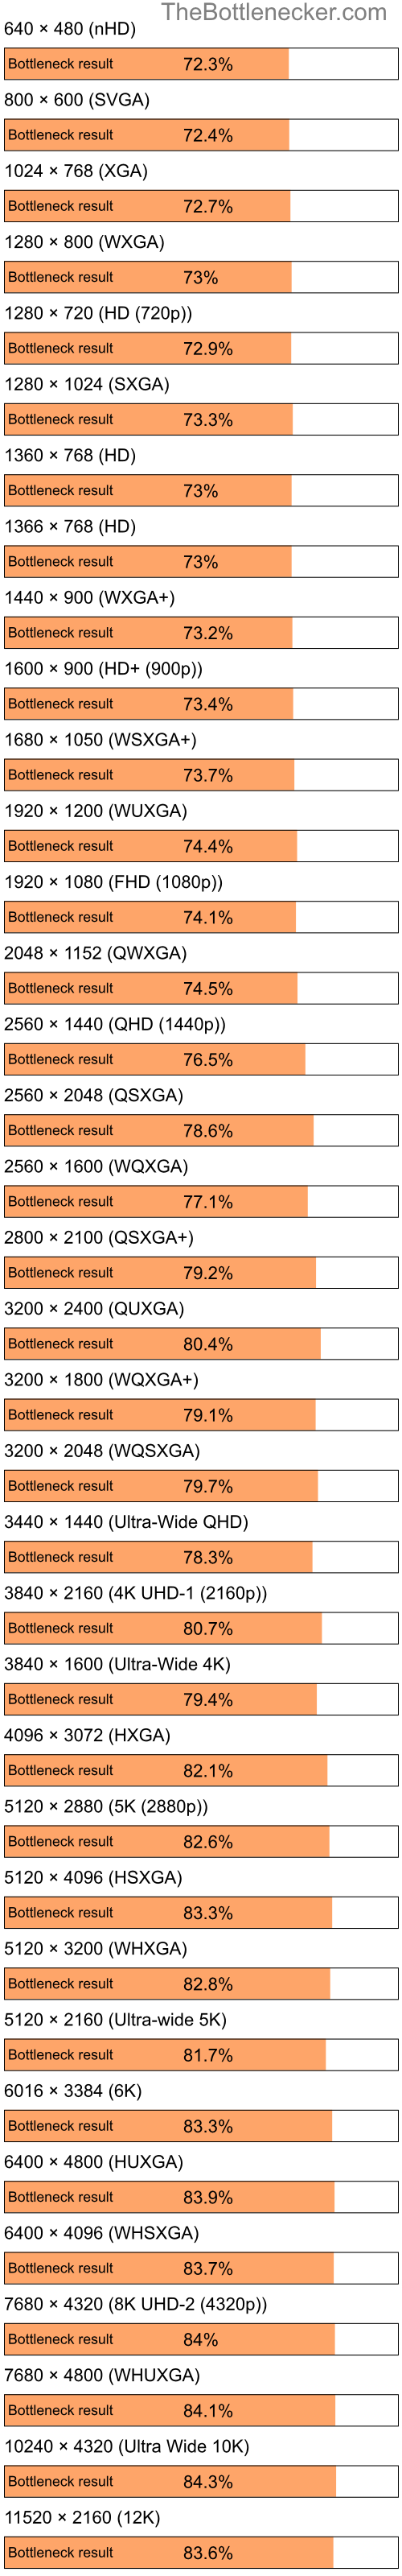 Bottleneck results by resolution for Intel Celeron and NVIDIA GeForce 8600M GS in Graphic Card Intense Tasks